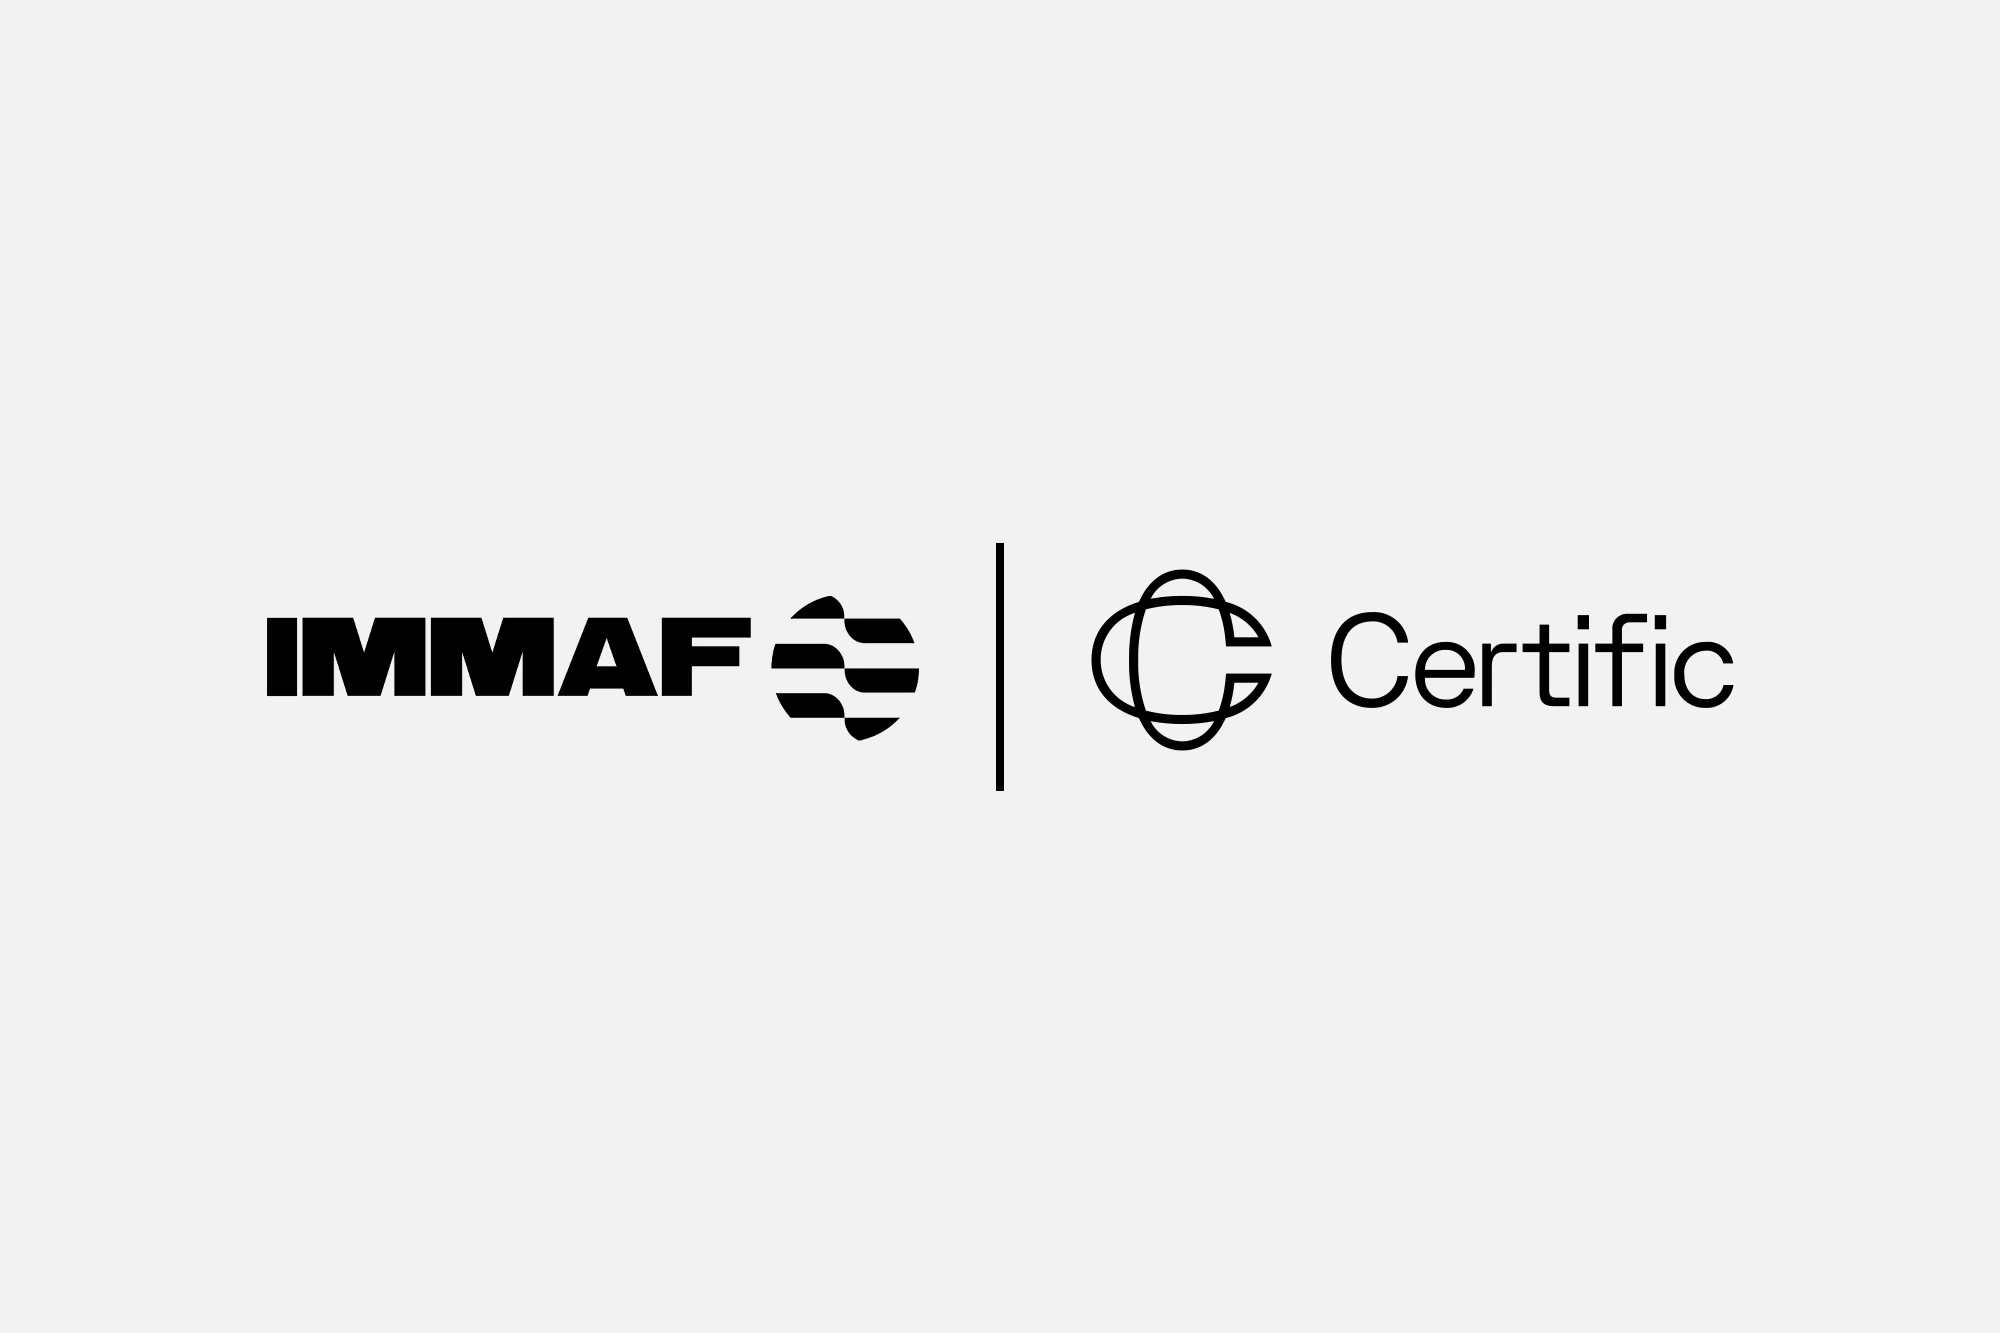 IMMAF and Certific have partnered to deliver concussion training to athletes ©IMMAF